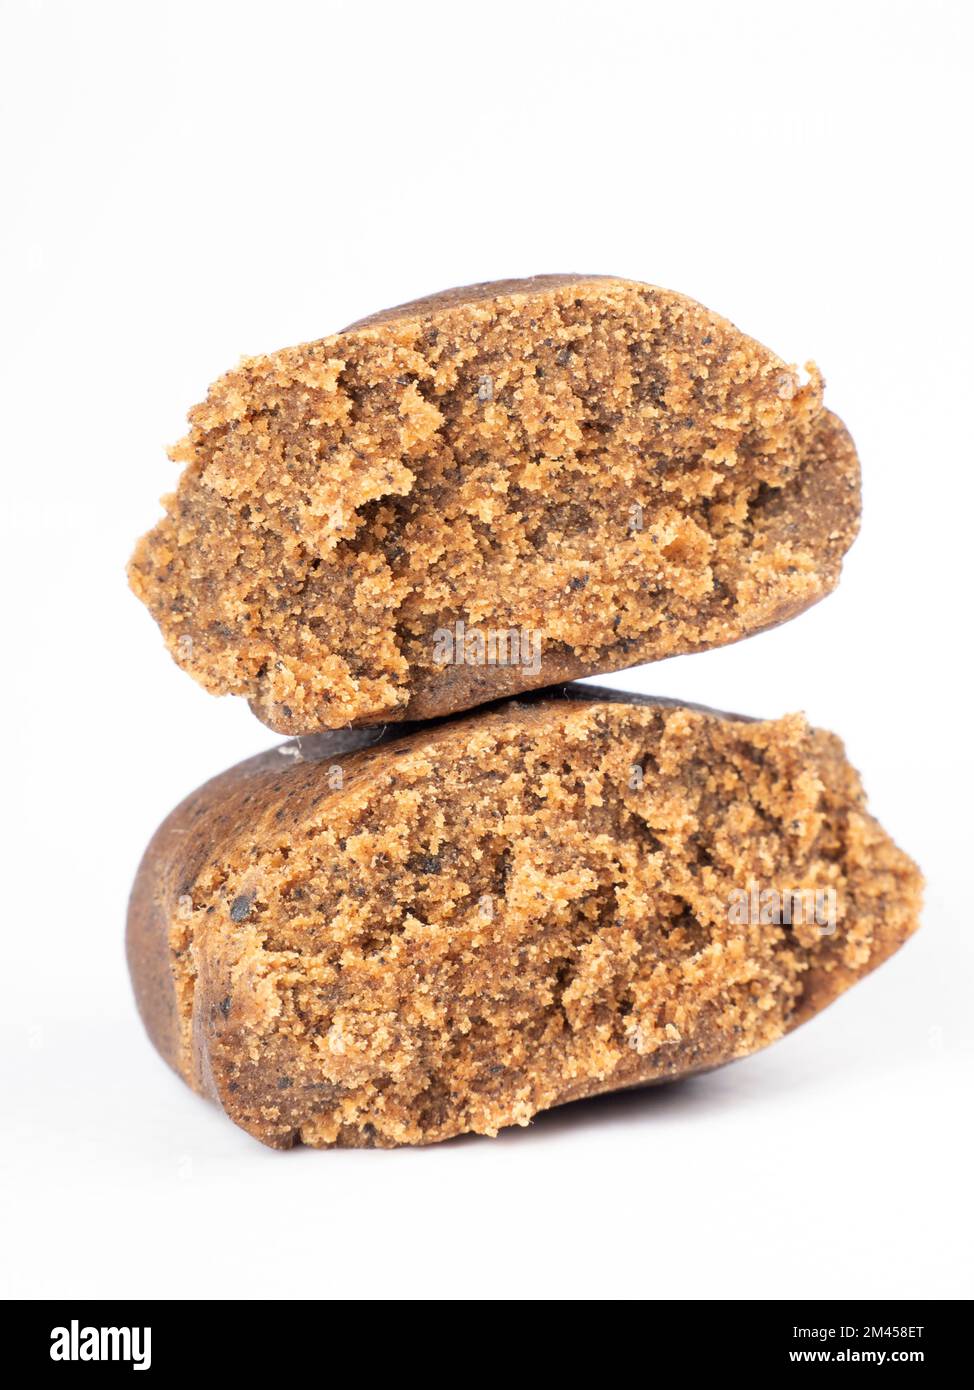 isolated cannabis hash piece, brown hashish on white background. Stock Photo